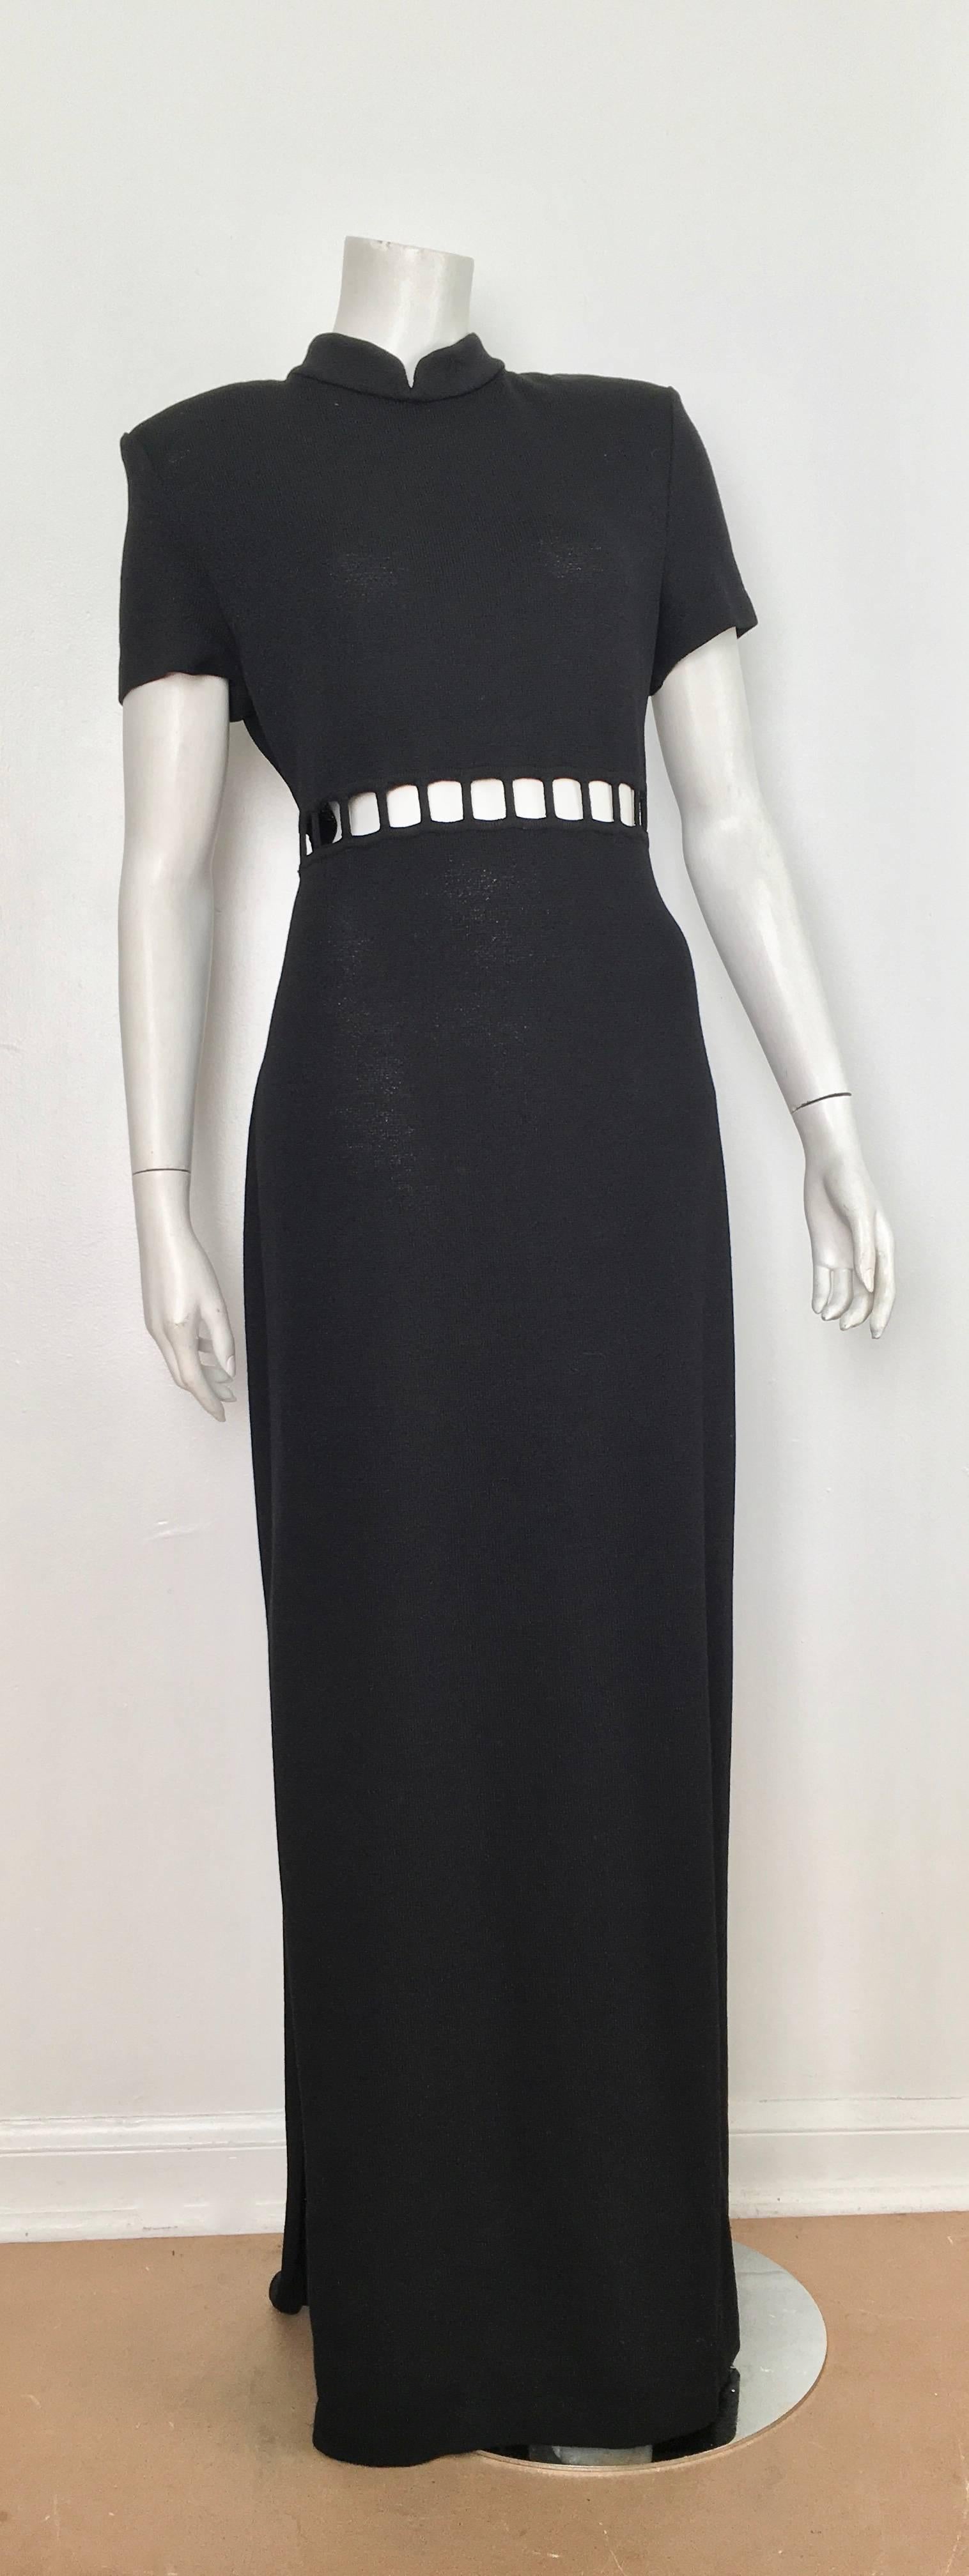 St. John Black Knit Short Sleeve Maxi Evening Dress Size 10.  In Excellent Condition For Sale In Atlanta, GA